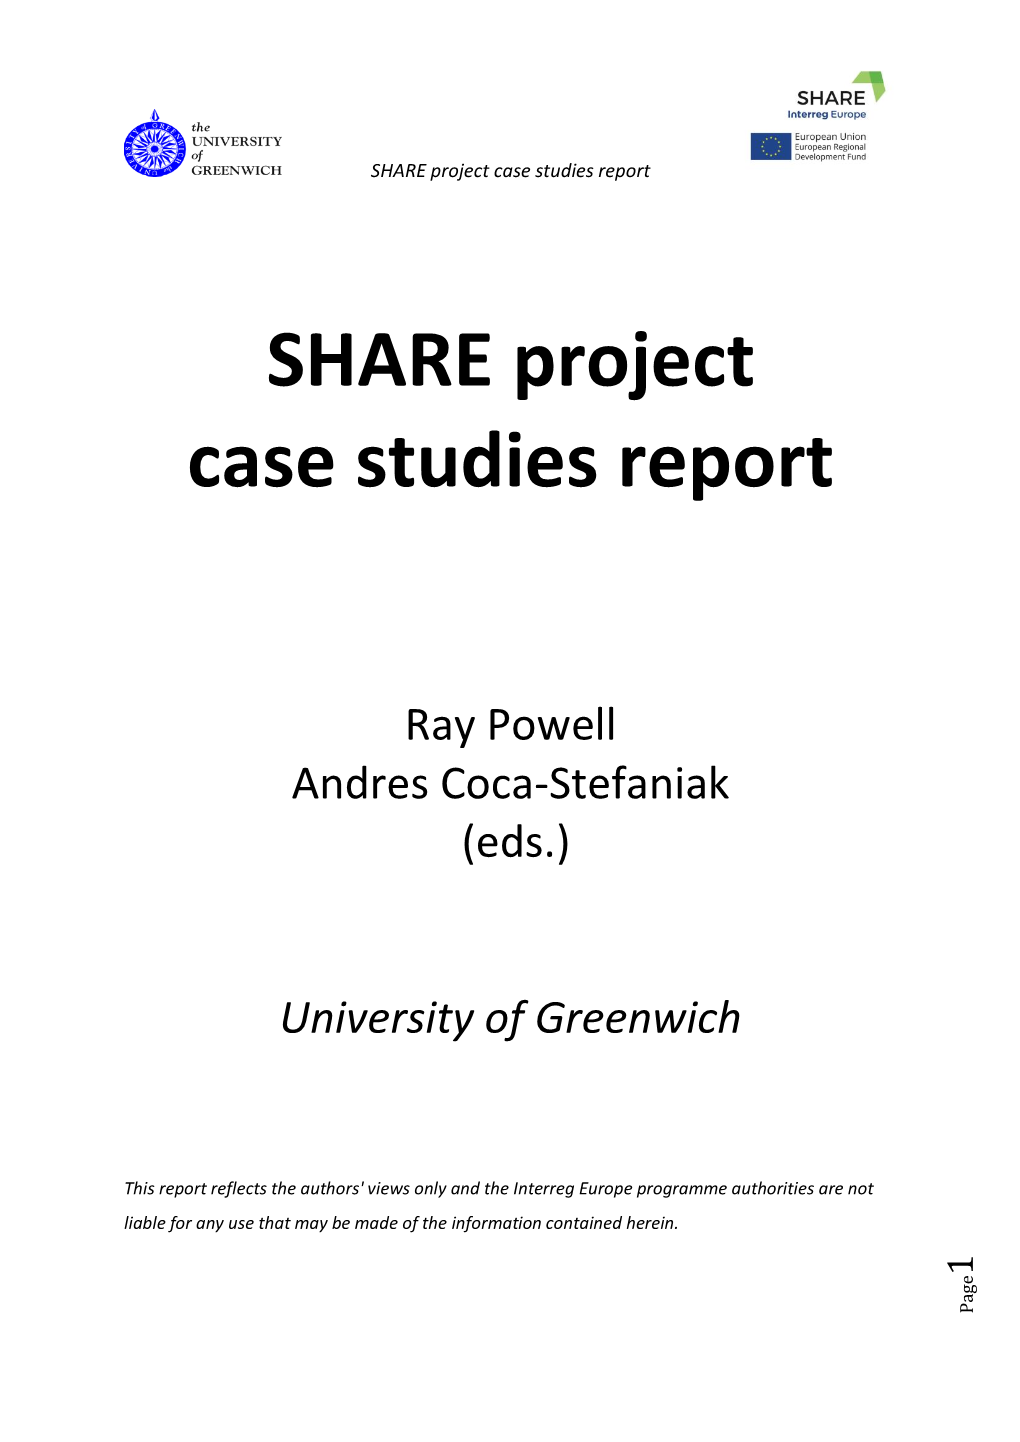 SHARE Project Case Studies Report